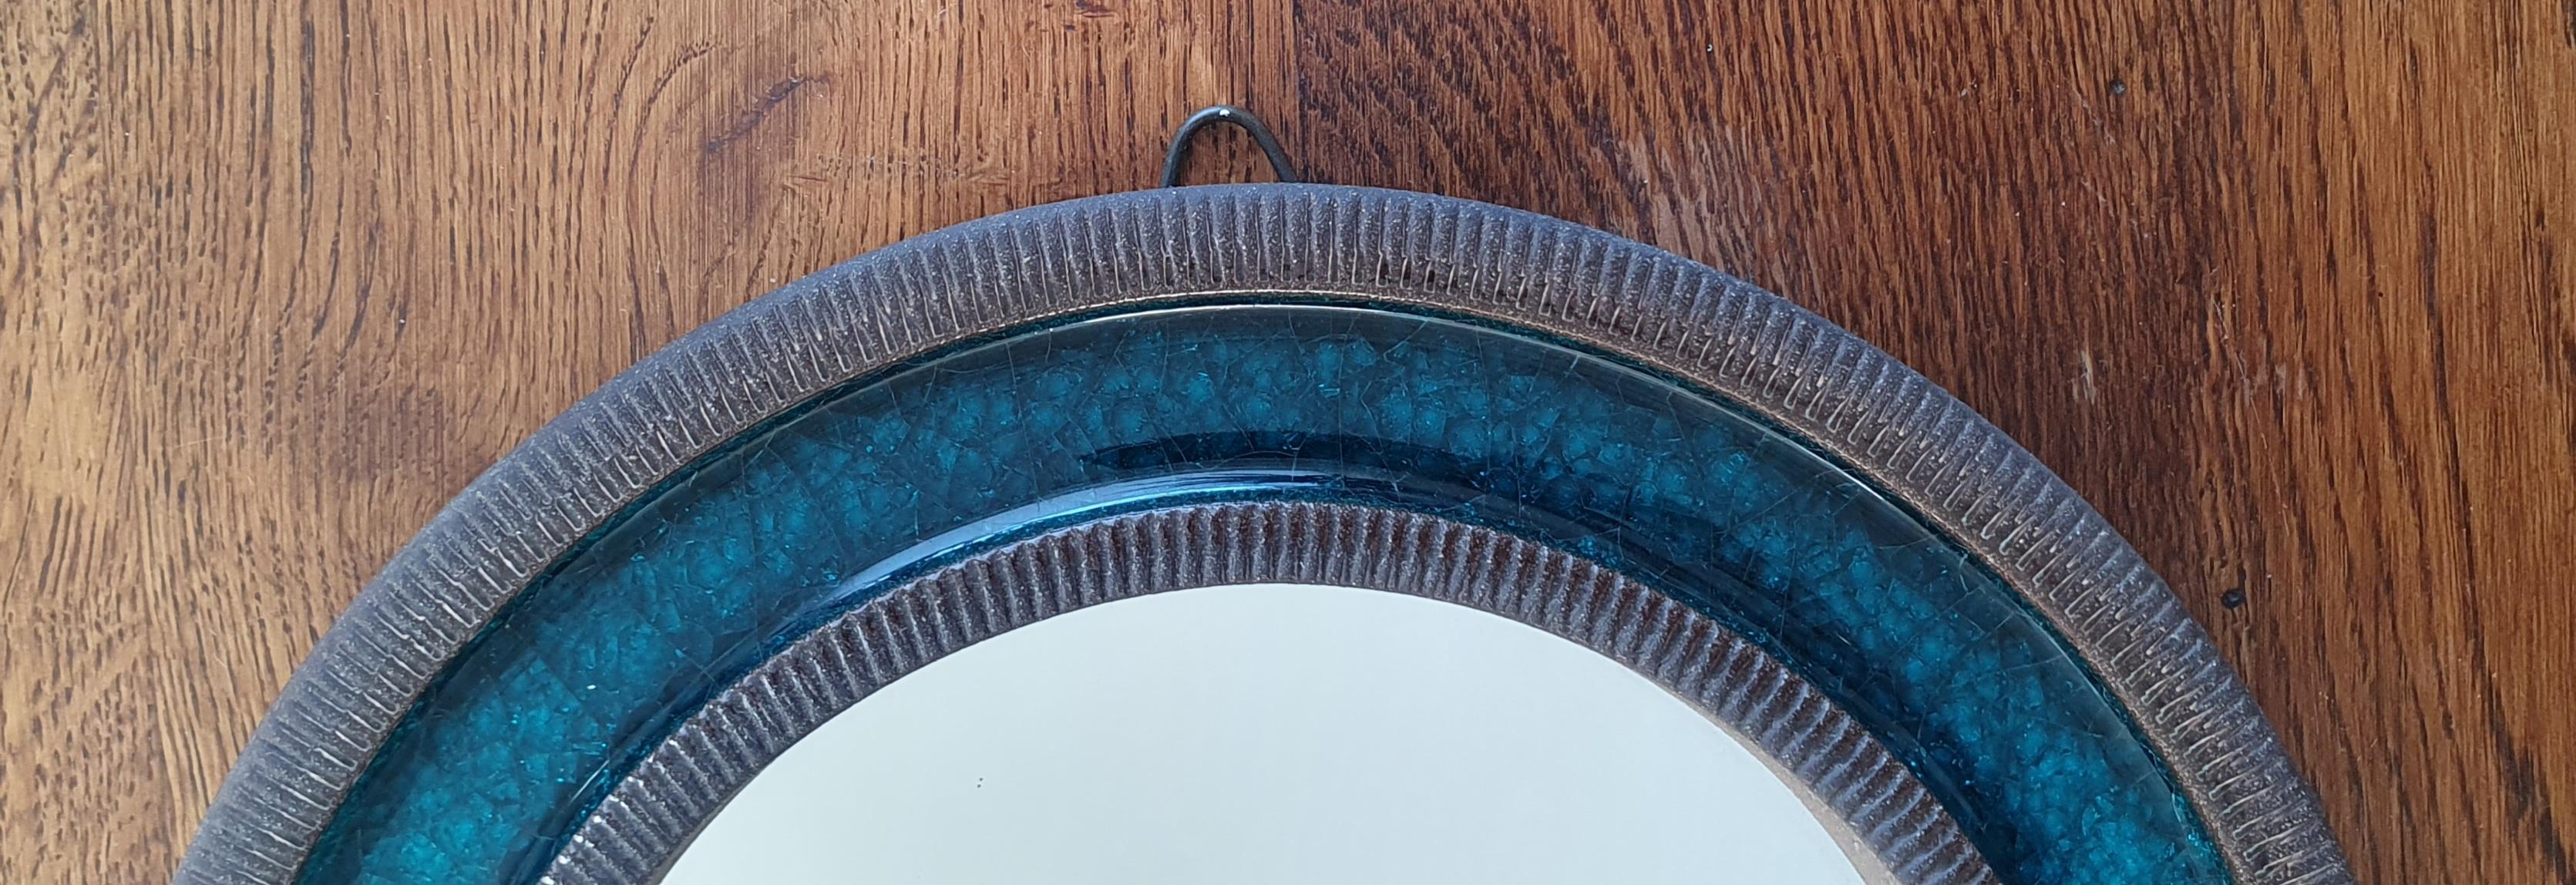 Blue midcentury round ceramic wall mirror designed by Erik Reiff for Danish Knabstrup. The mirror is made of glazed ceramic and has alternating rings with a ceramic ribbed edge and a smooth turquoise/green crystalline glaze on the inside. This color